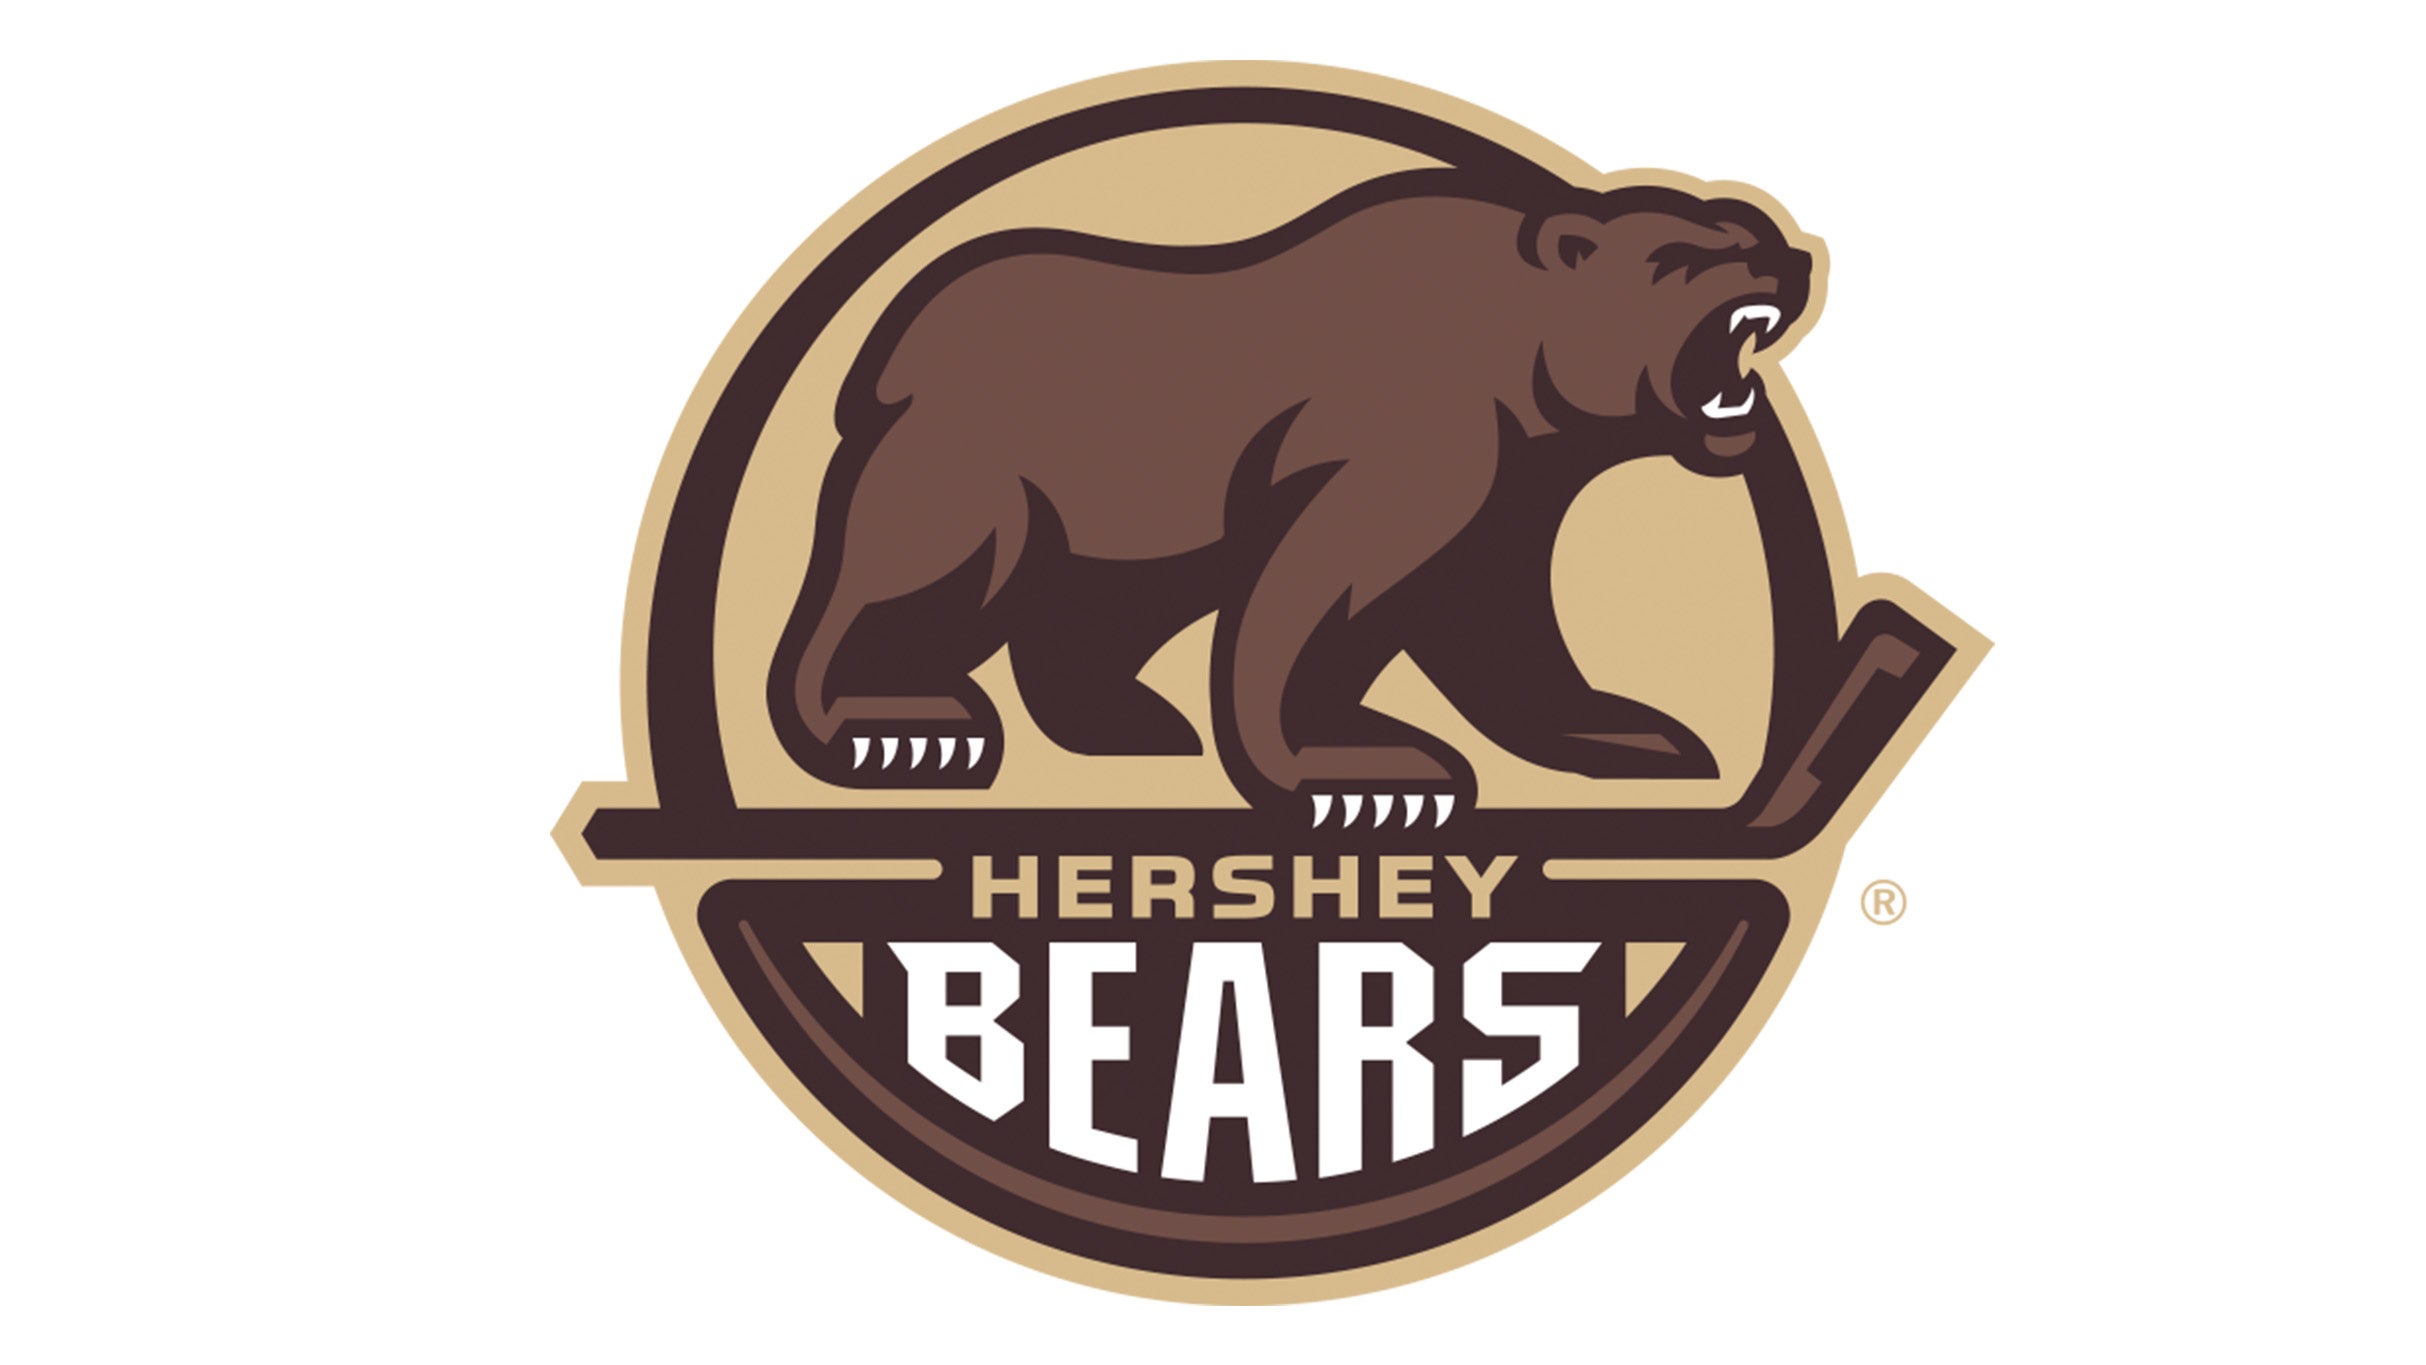 Hershey Bears - Calder Cup Finals - Round 5, Home Game 3